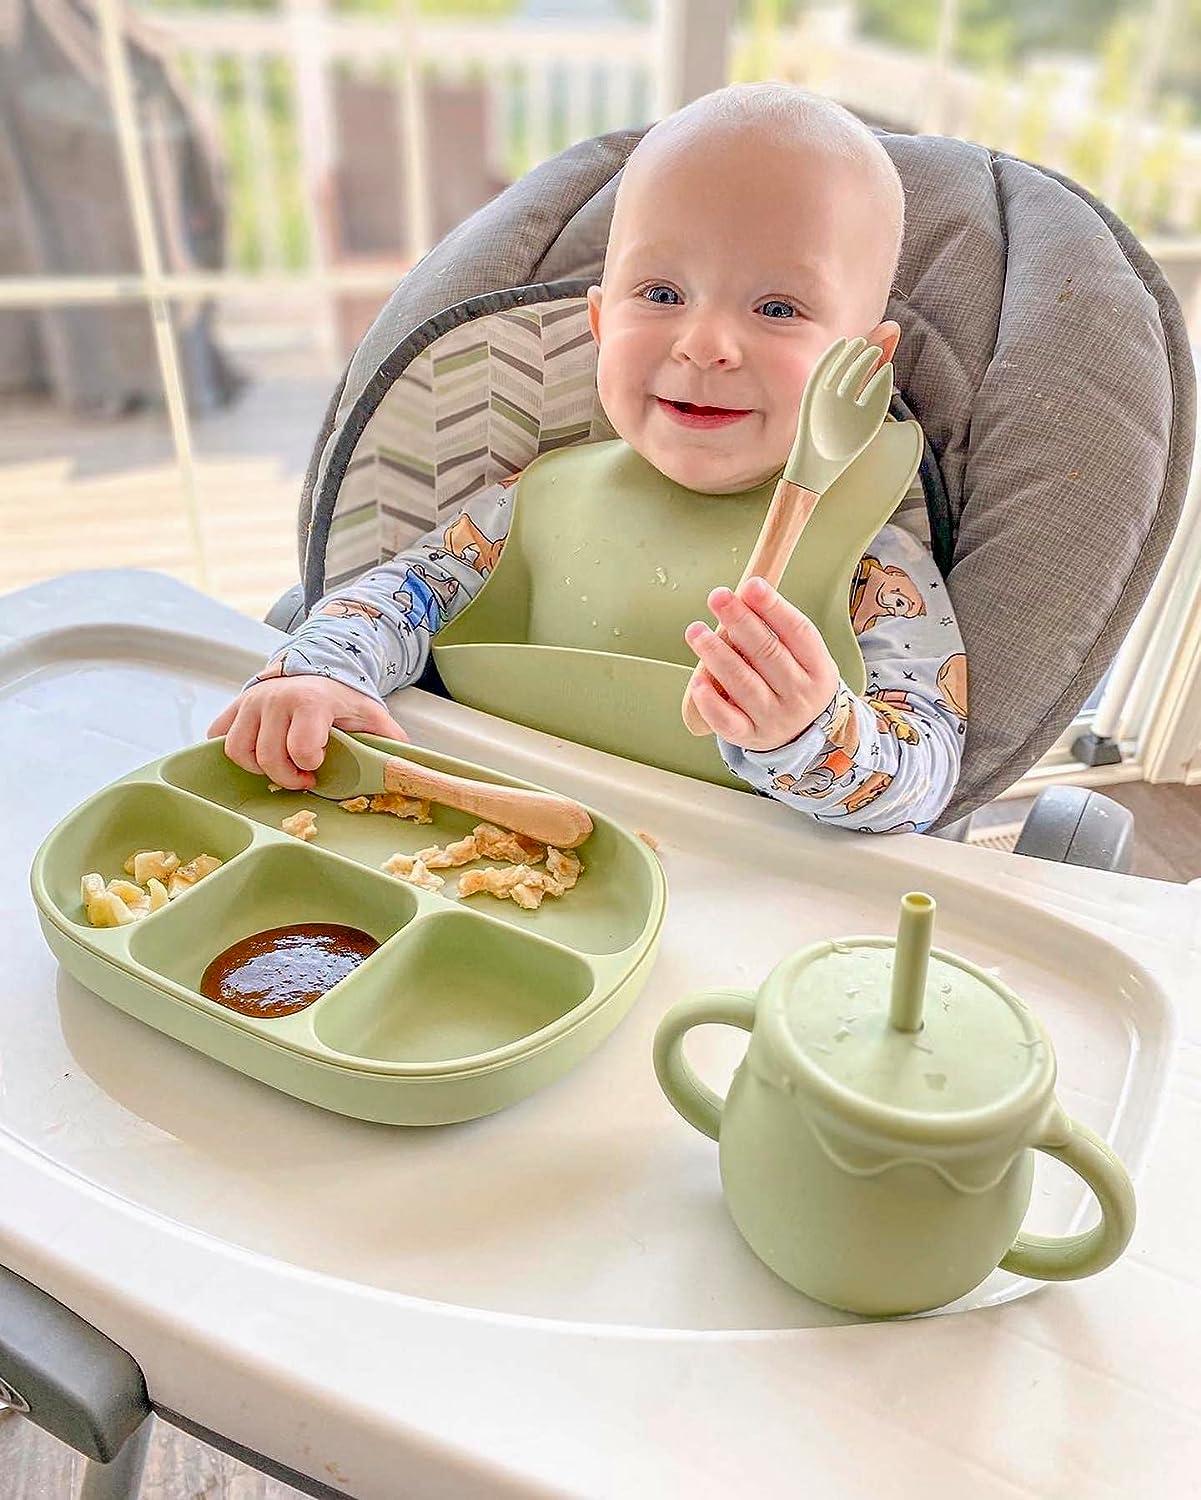 Spill-Proof Sippy Cup: Helps Your Baby Drink on Their Own